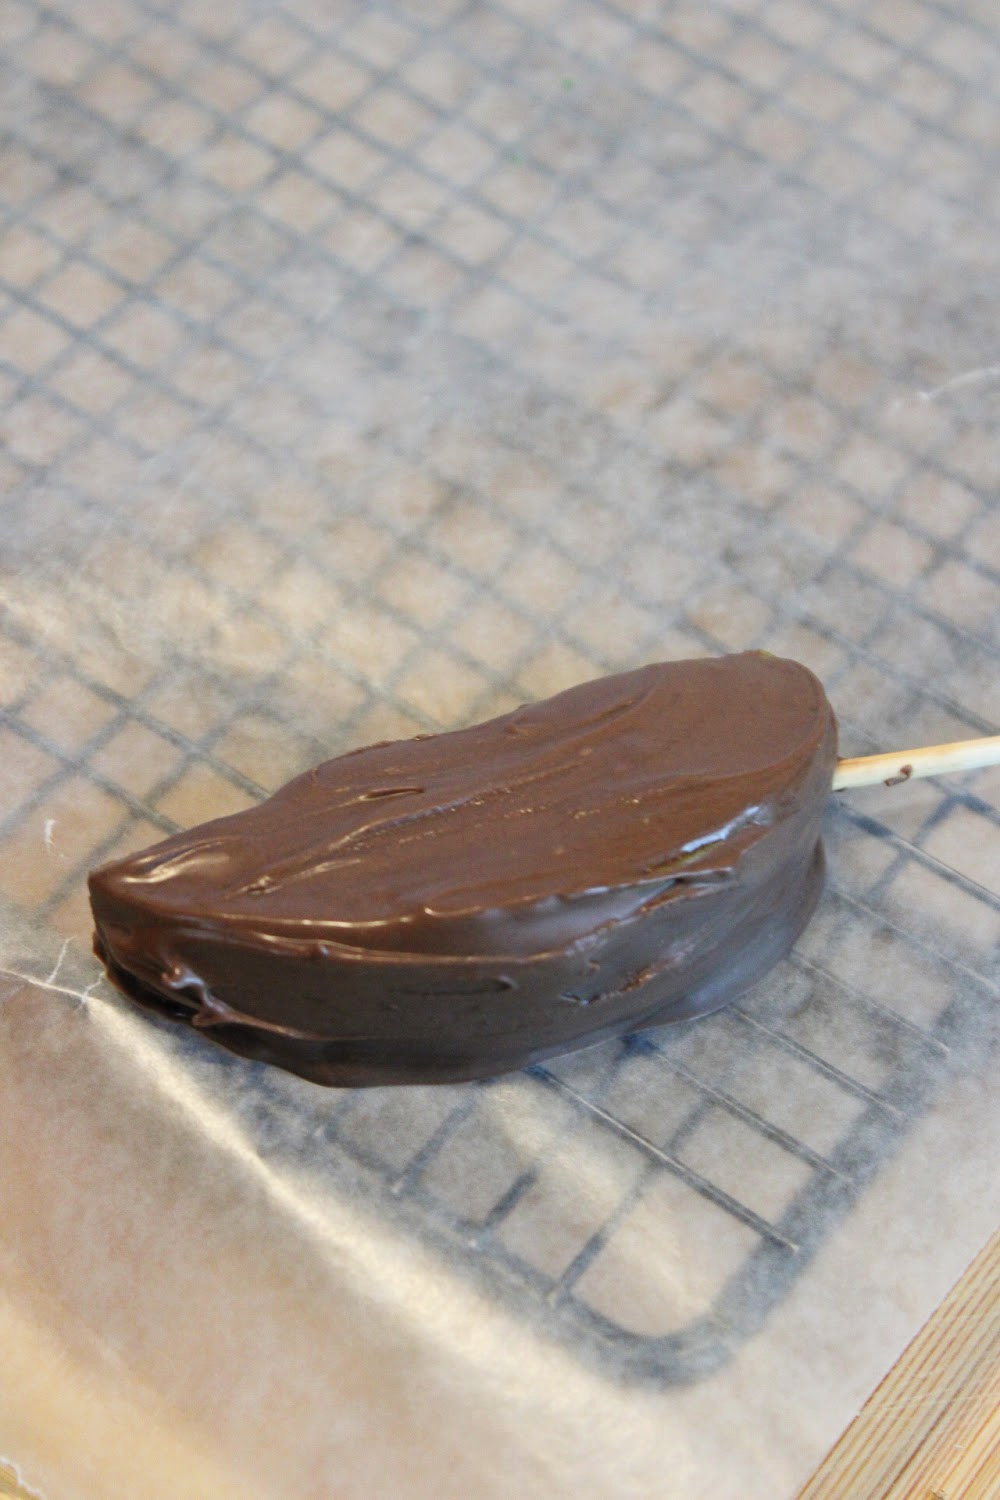 place a skewer in the chocolate dipped apple slice.